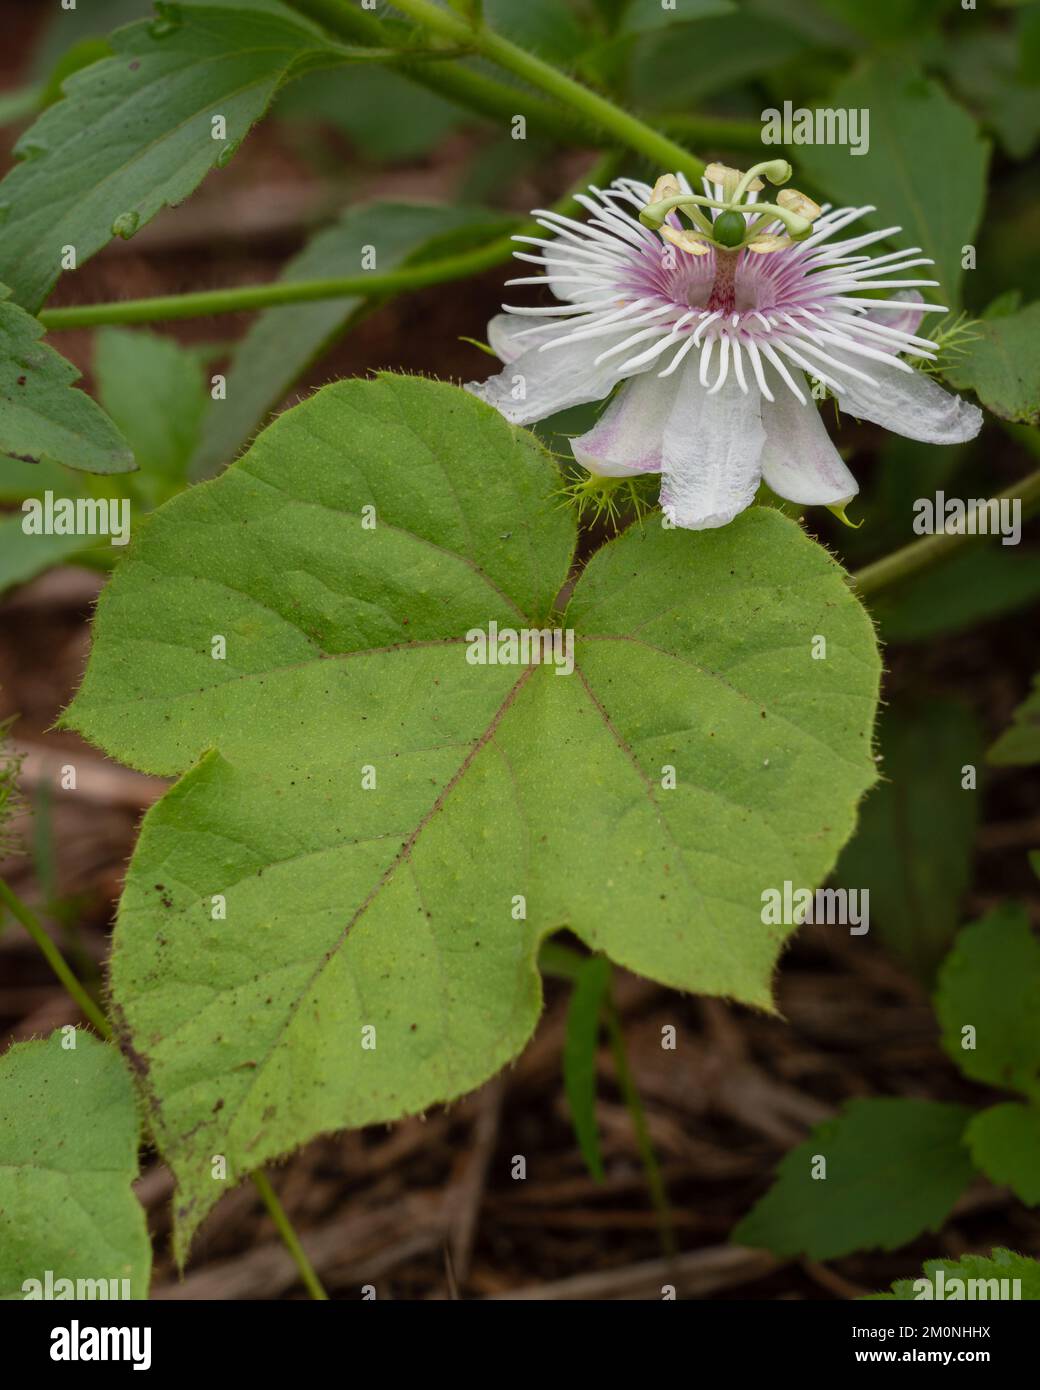 Closeup vertical view of bright white and purple pink flower and leaf of wild passiflora foetida vine aka stinking passionflower on natural background Stock Photo